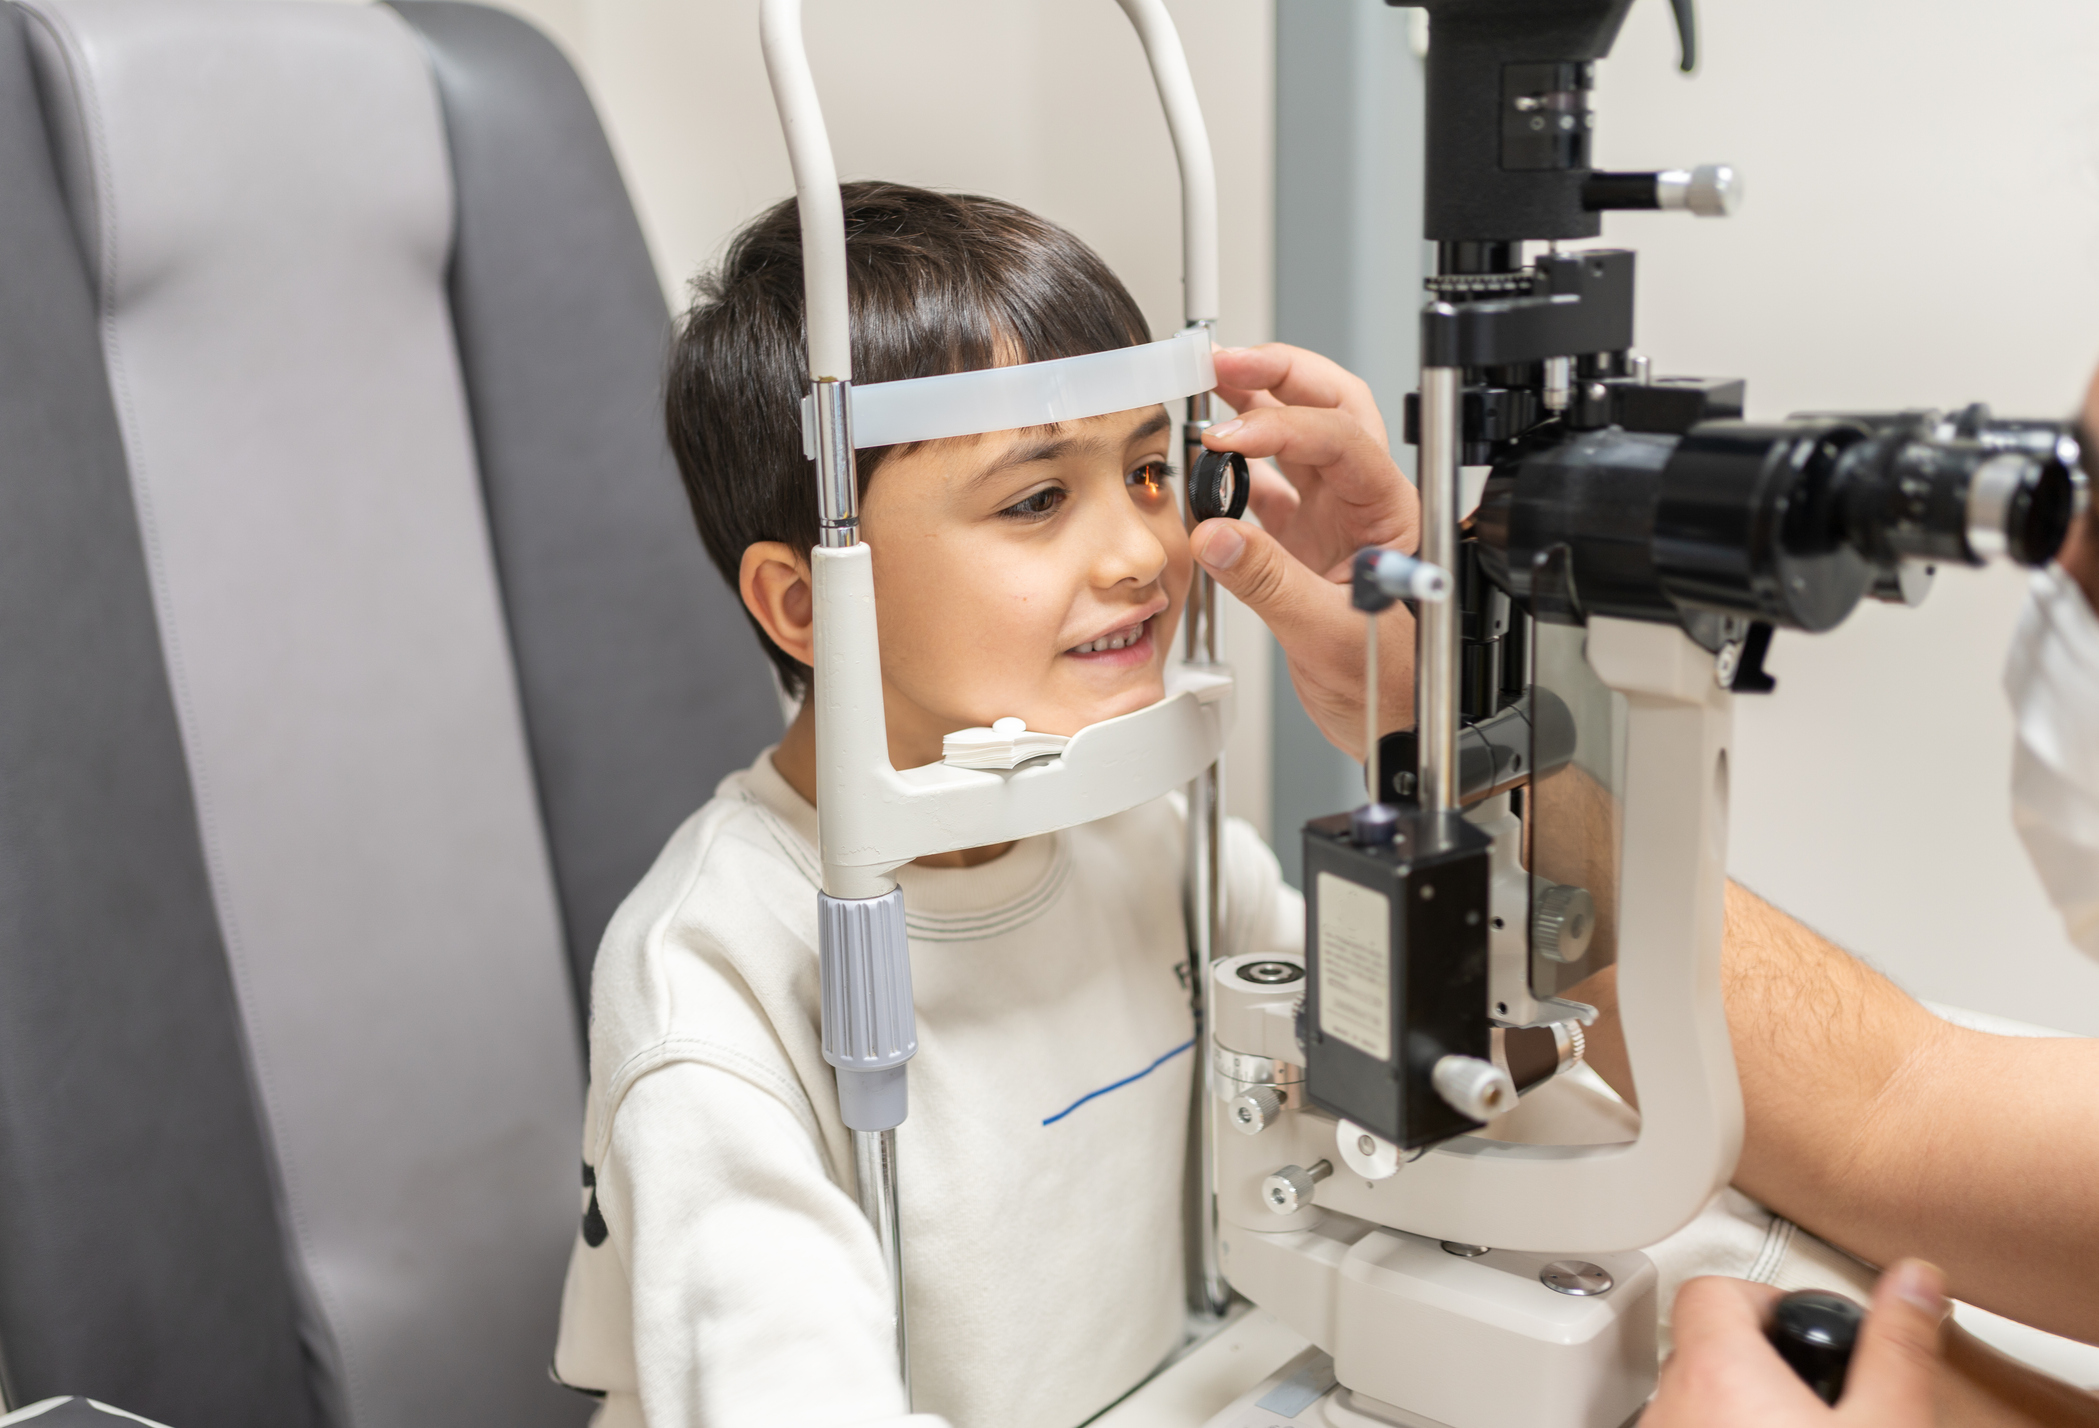 Tips for Children’s Eye Health and Safety